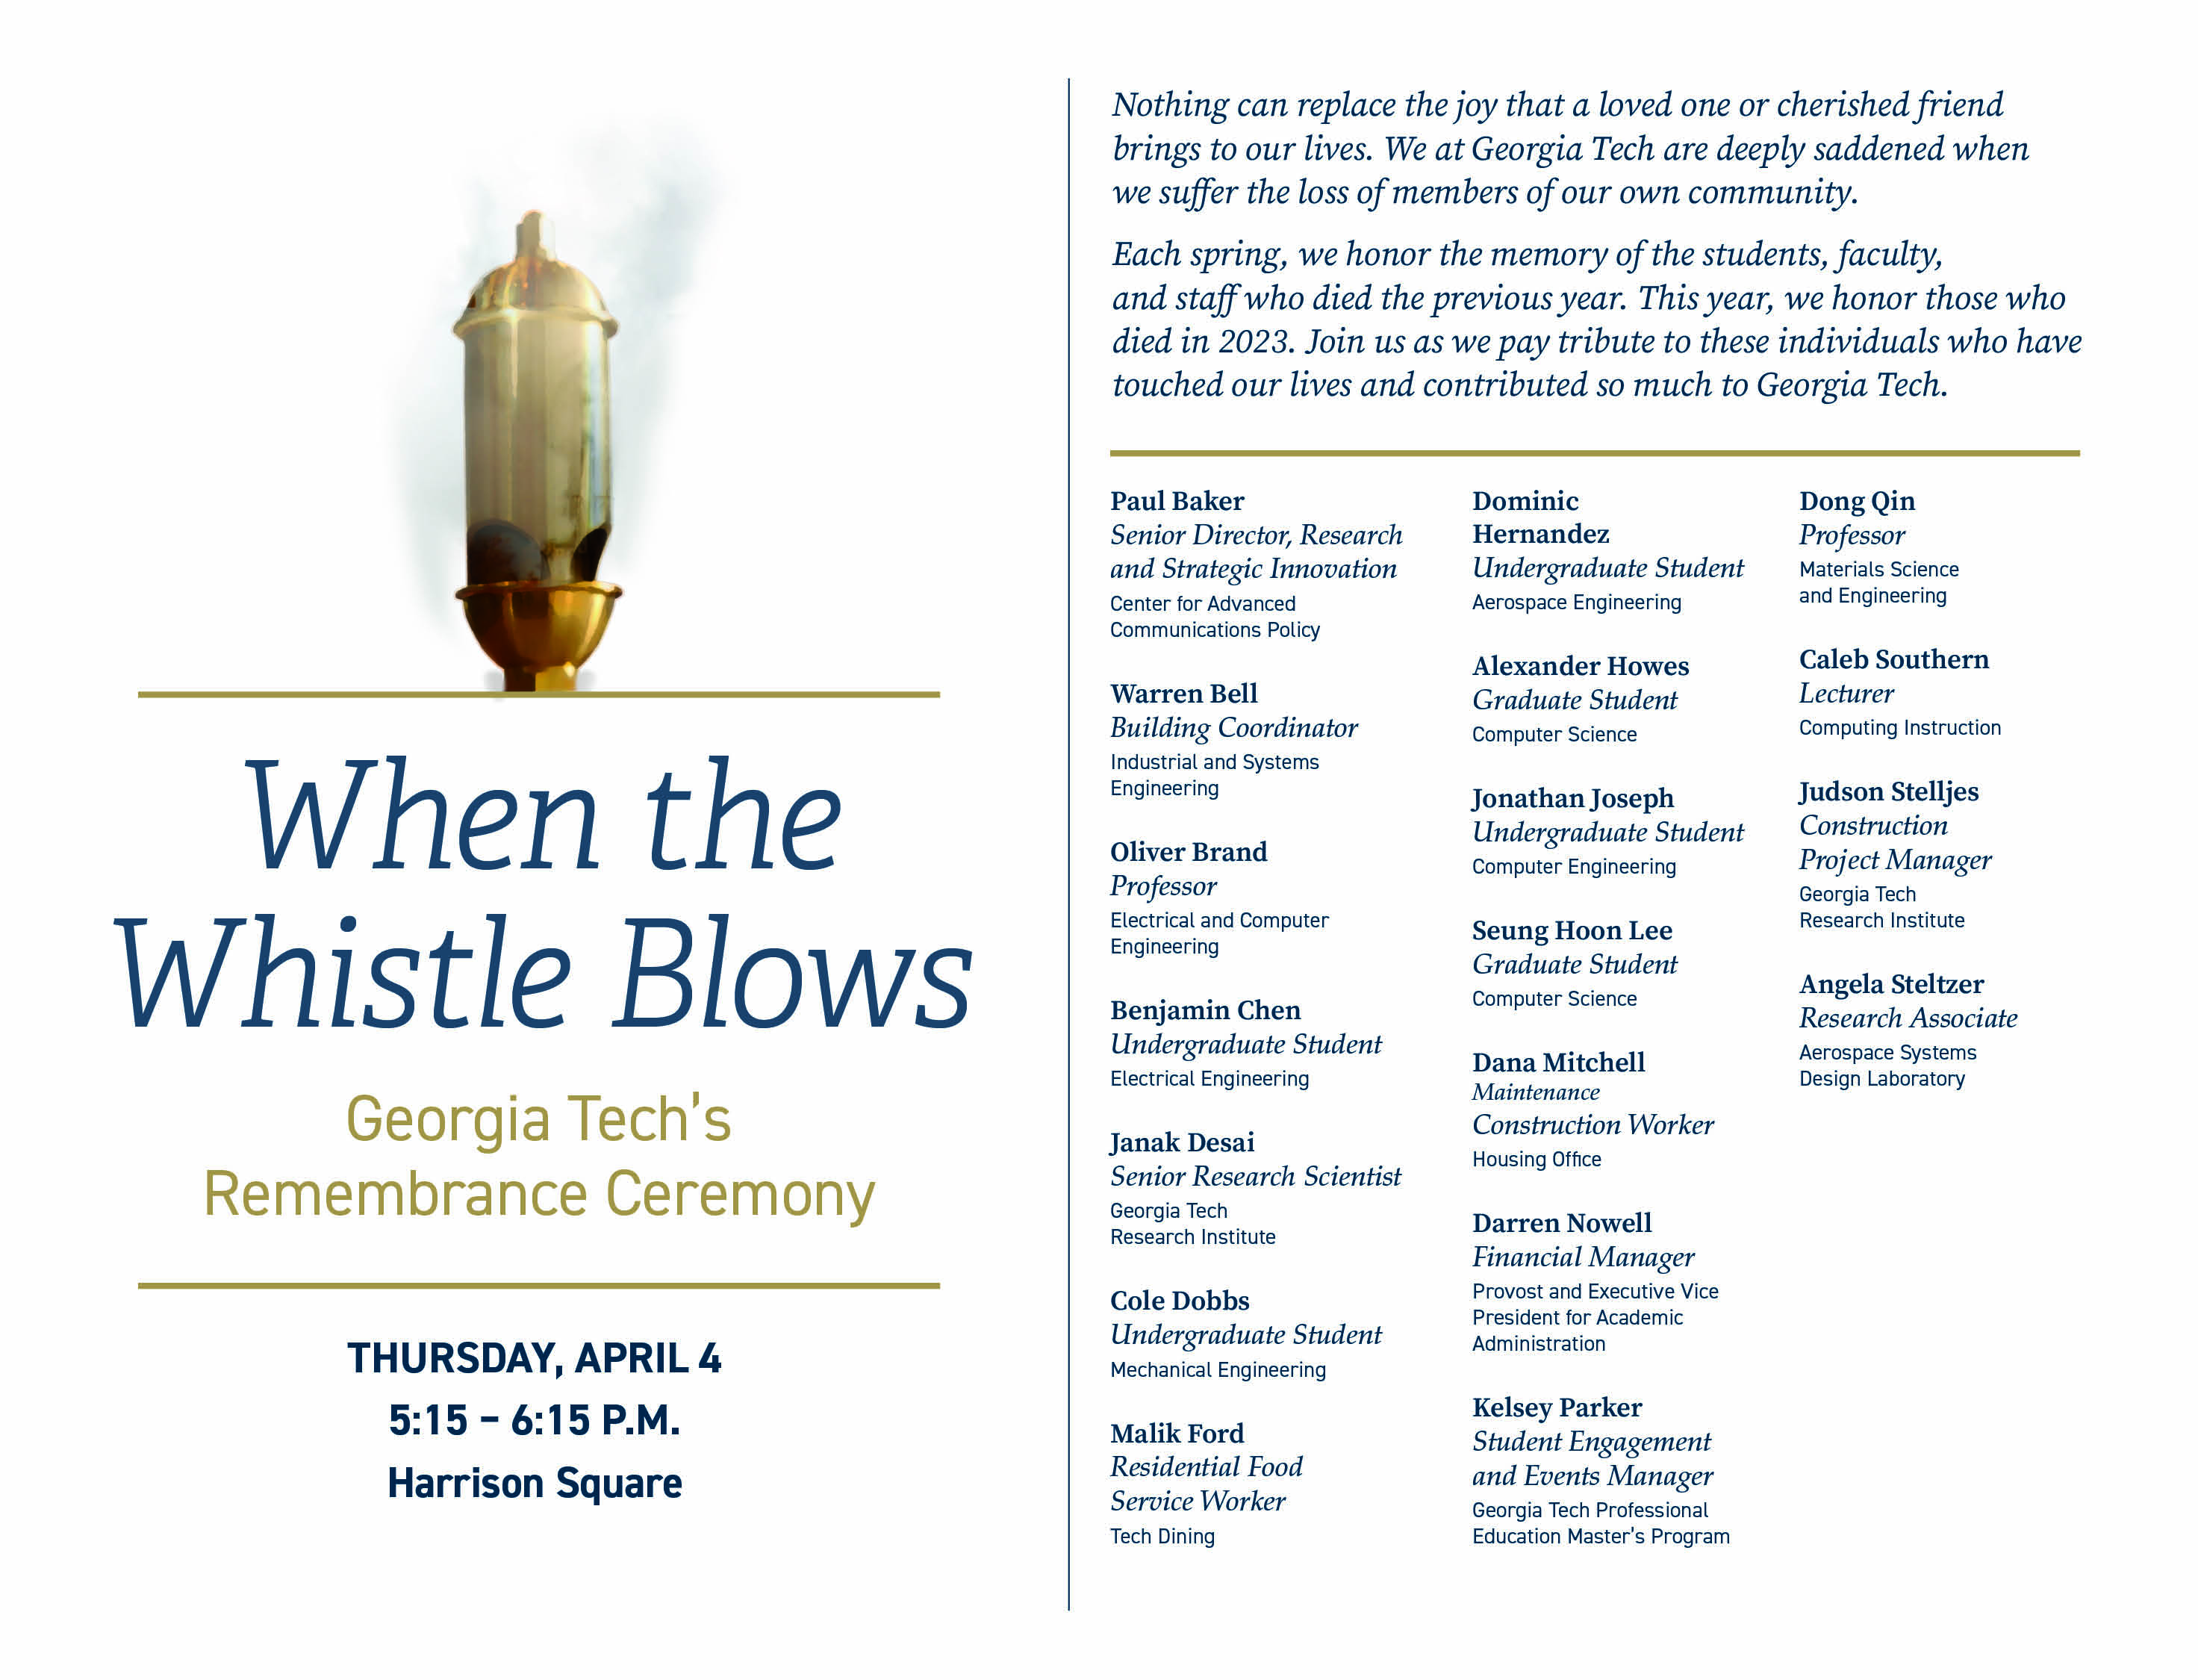 When the Whistle Blows Honorees